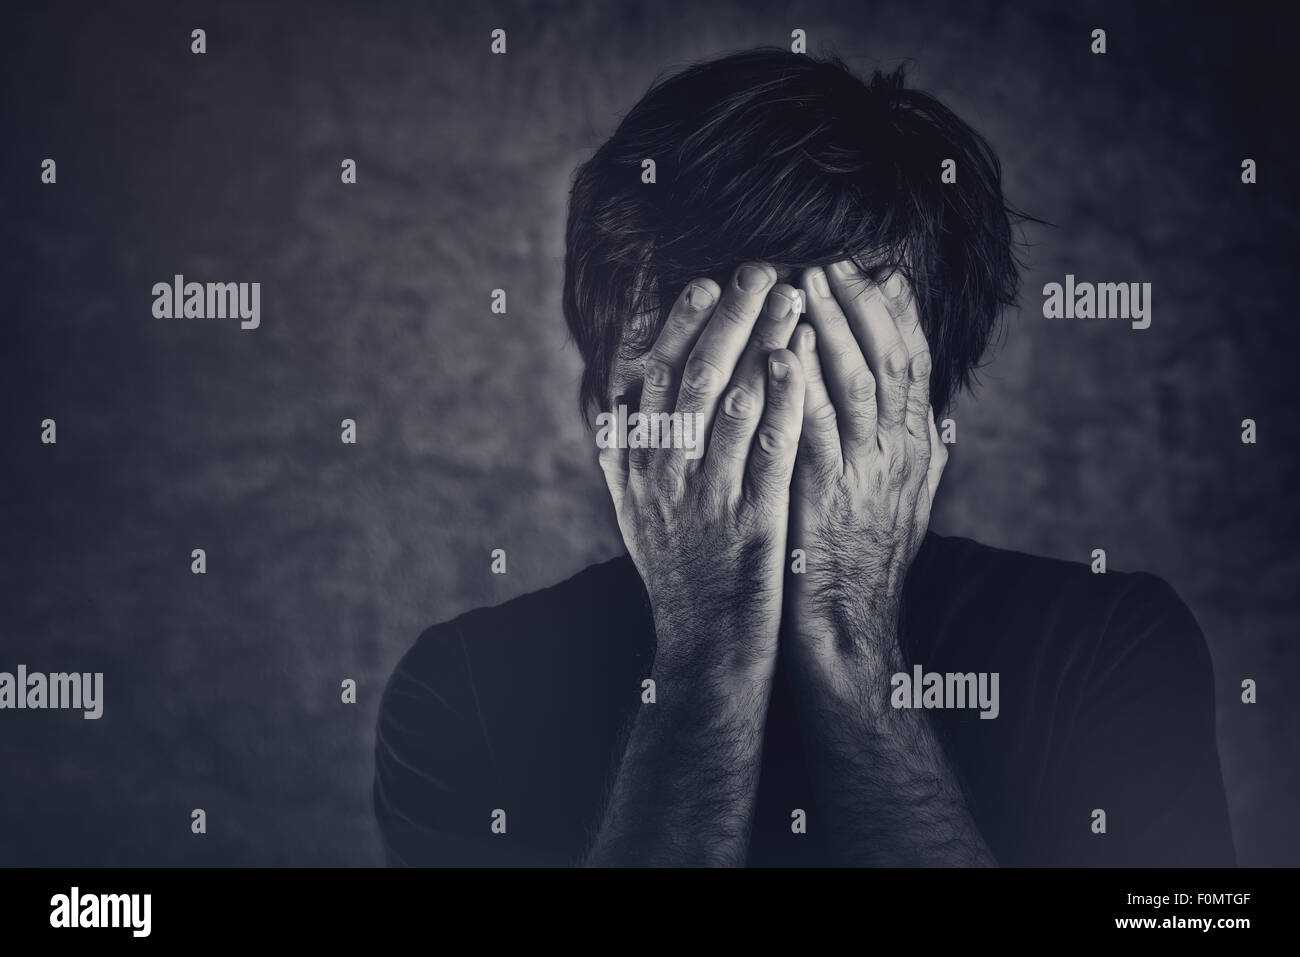 Grief, man covering face and crying, monochromatic image Stock Photo